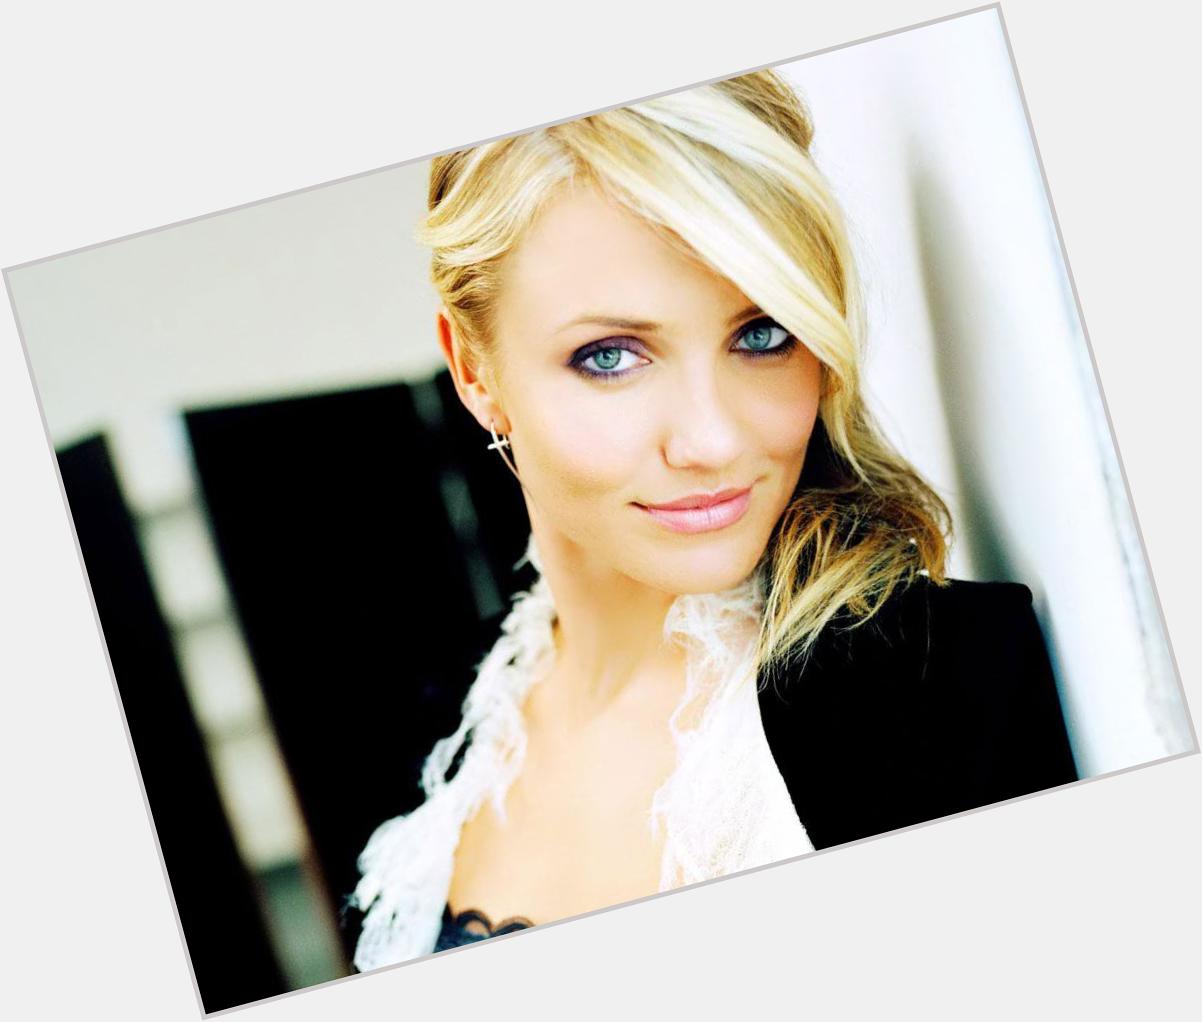 Celebrity store wishes d gorgeous Cameron Diaz a very Happy Birthday.   